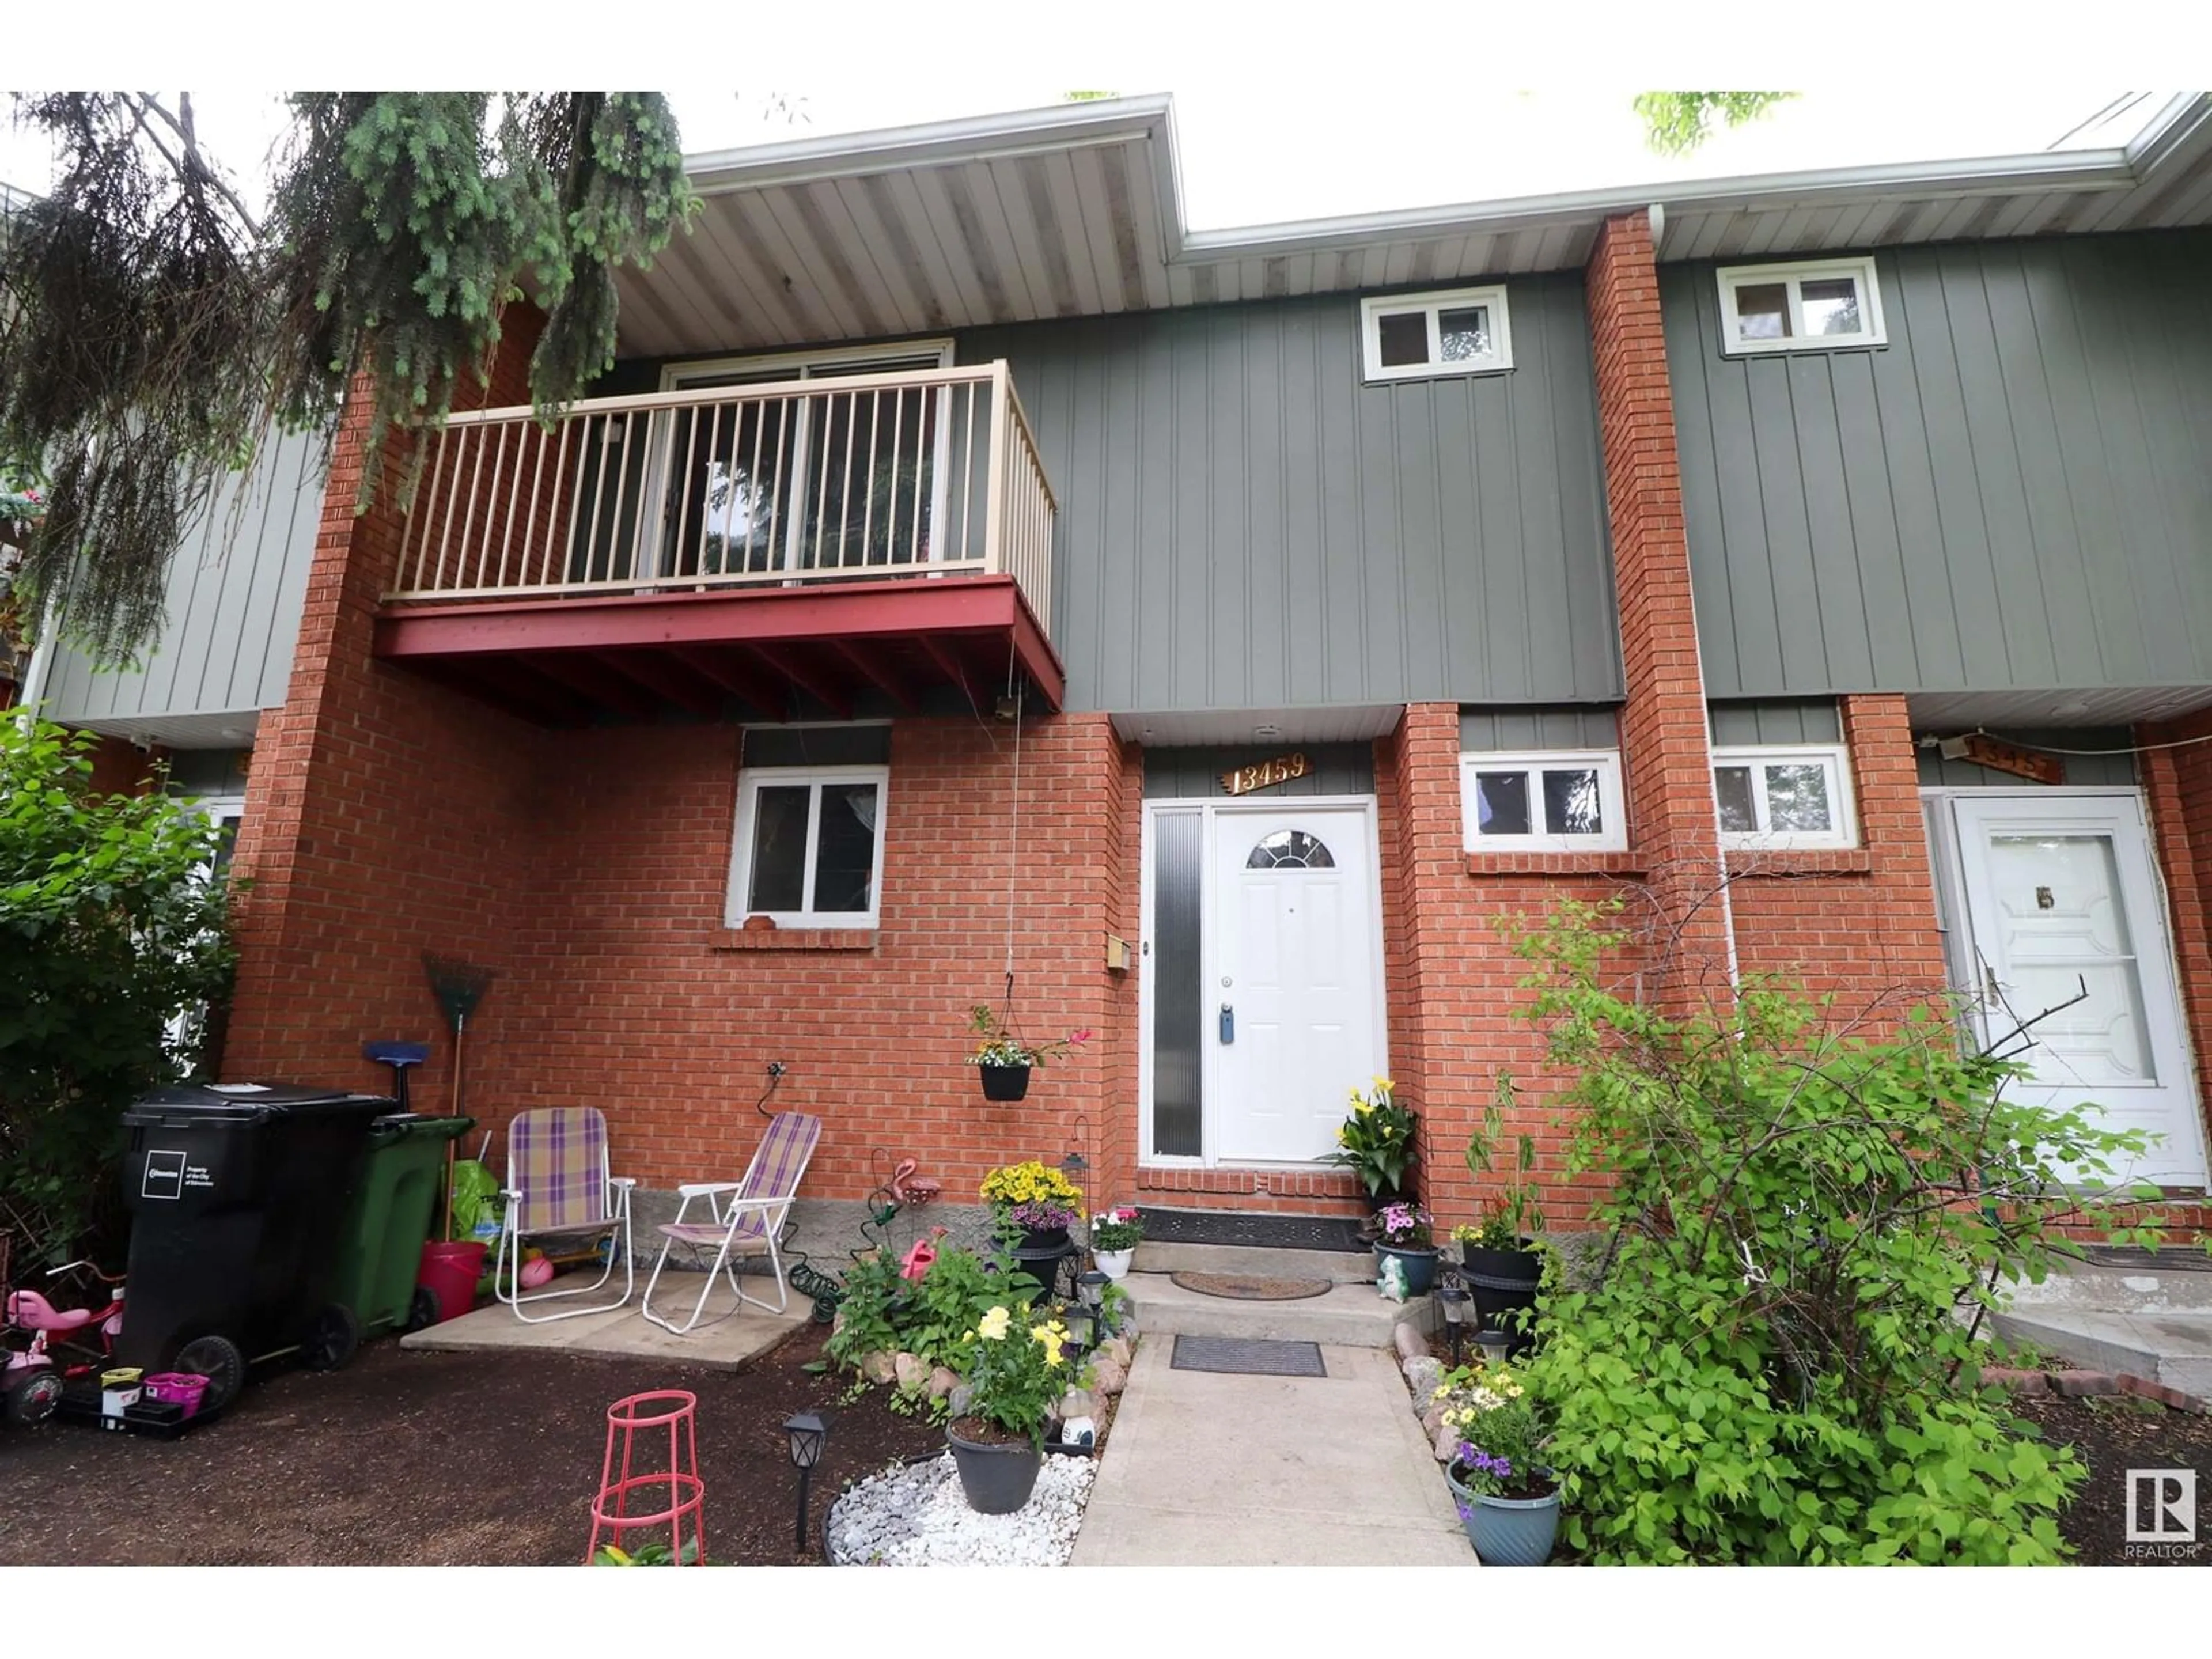 A pic from exterior of the house or condo for 13459 40 ST NW, Edmonton Alberta T5A3L9